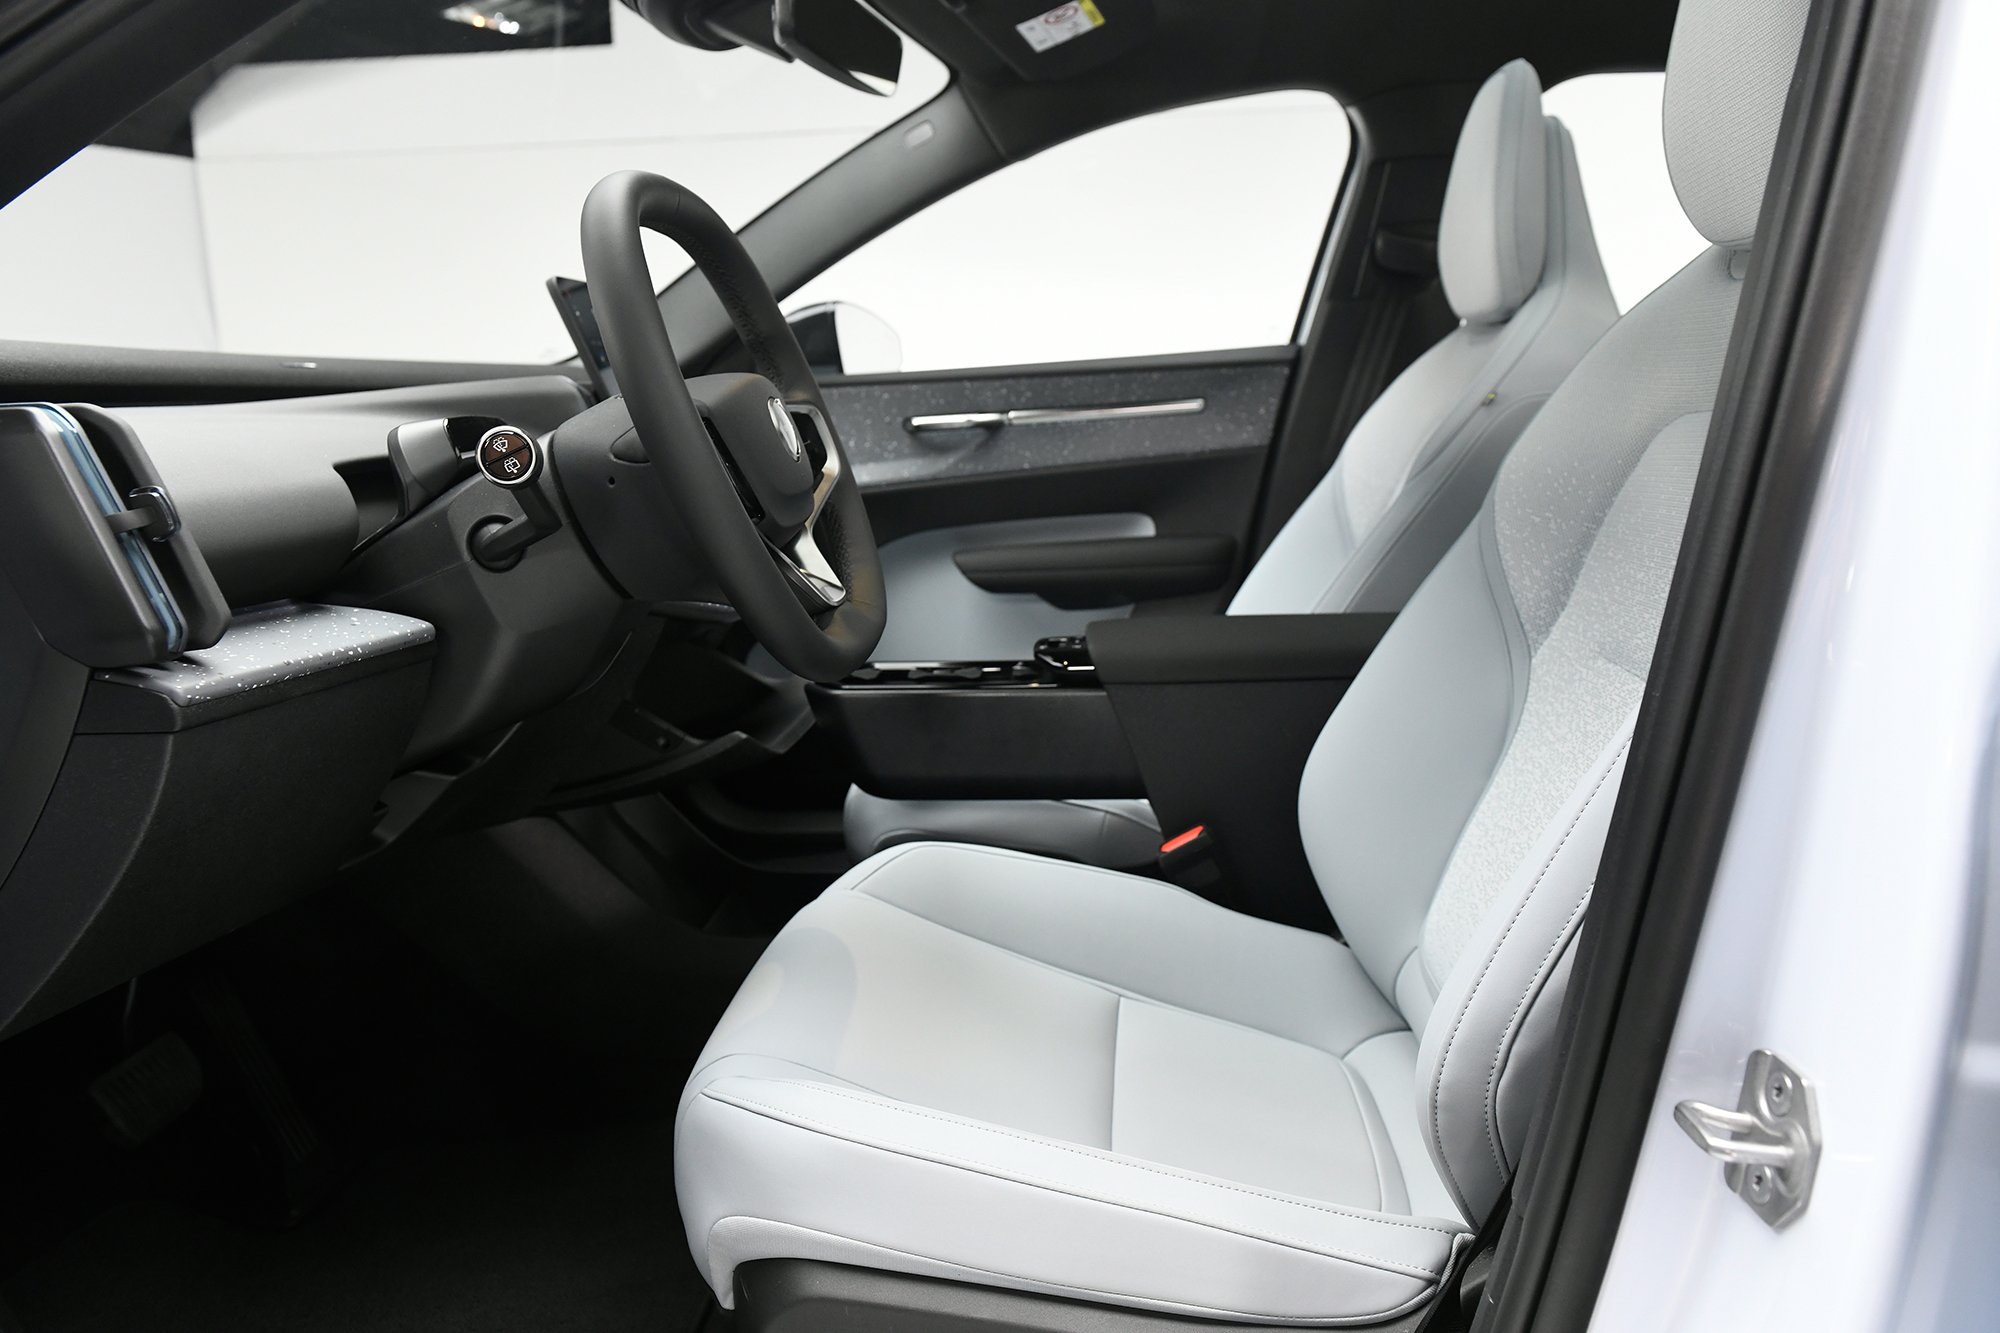 The sleek interior design of the all-electric Volvo EX30